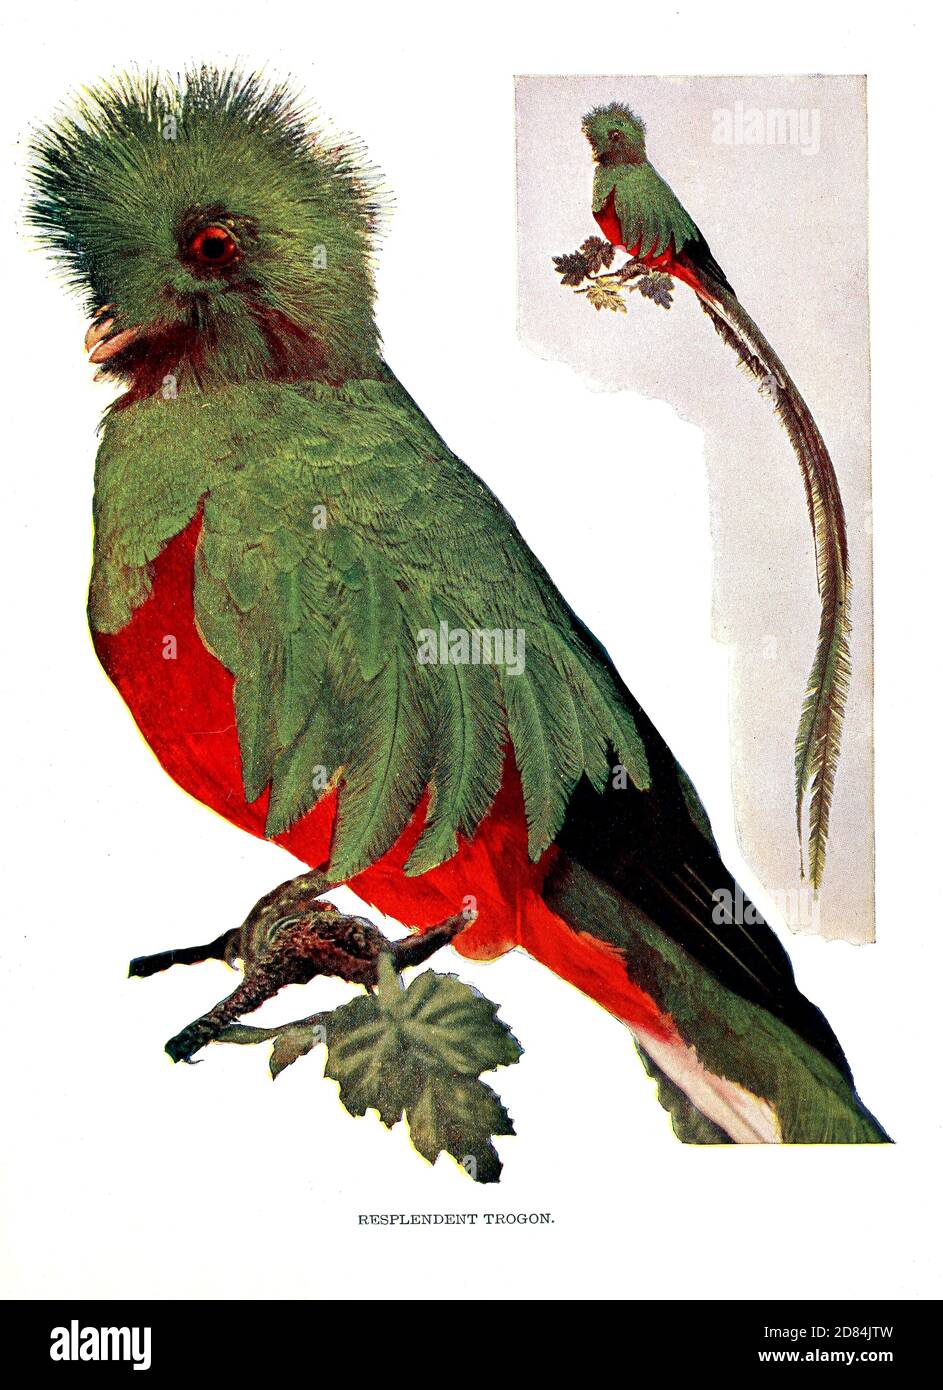 The resplendent quetzal (Pharomachrus mocinno [Here as Resplendent Trogon]) is a bird in the trogon family. It is found from Chiapas, Mexico to western Panama. It is well known for its colorful plumage. From Birds : illustrated by color photography : a monthly serial. Knowledge of Bird-life Vol 1 No 1 January 1897 Stock Photo